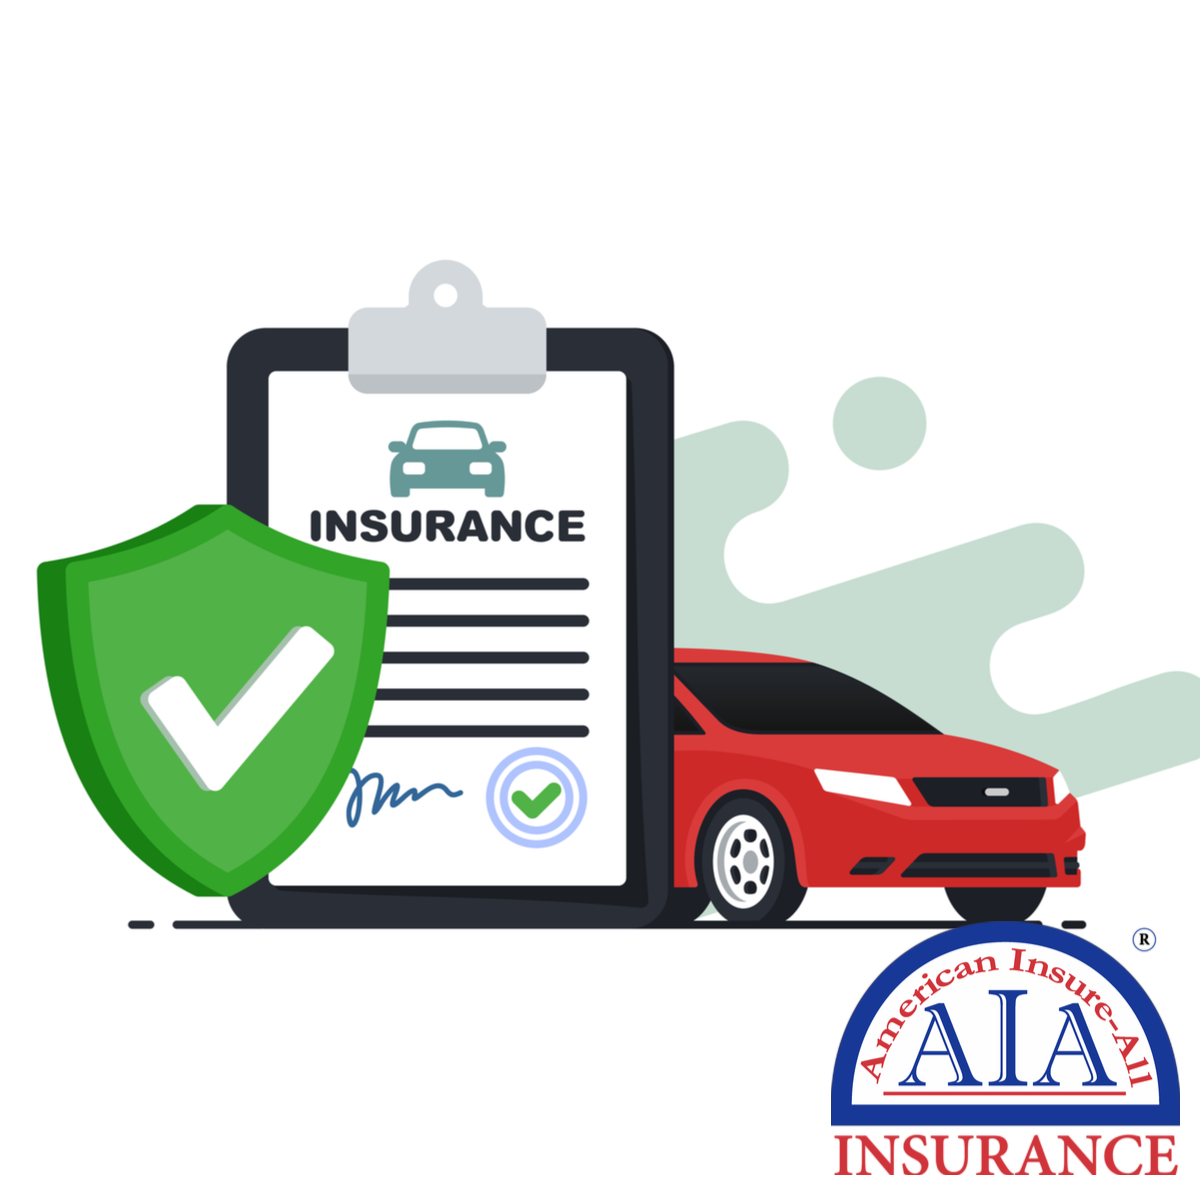 Find the Best Auto Insurance in Kirkland with American Insure-All®